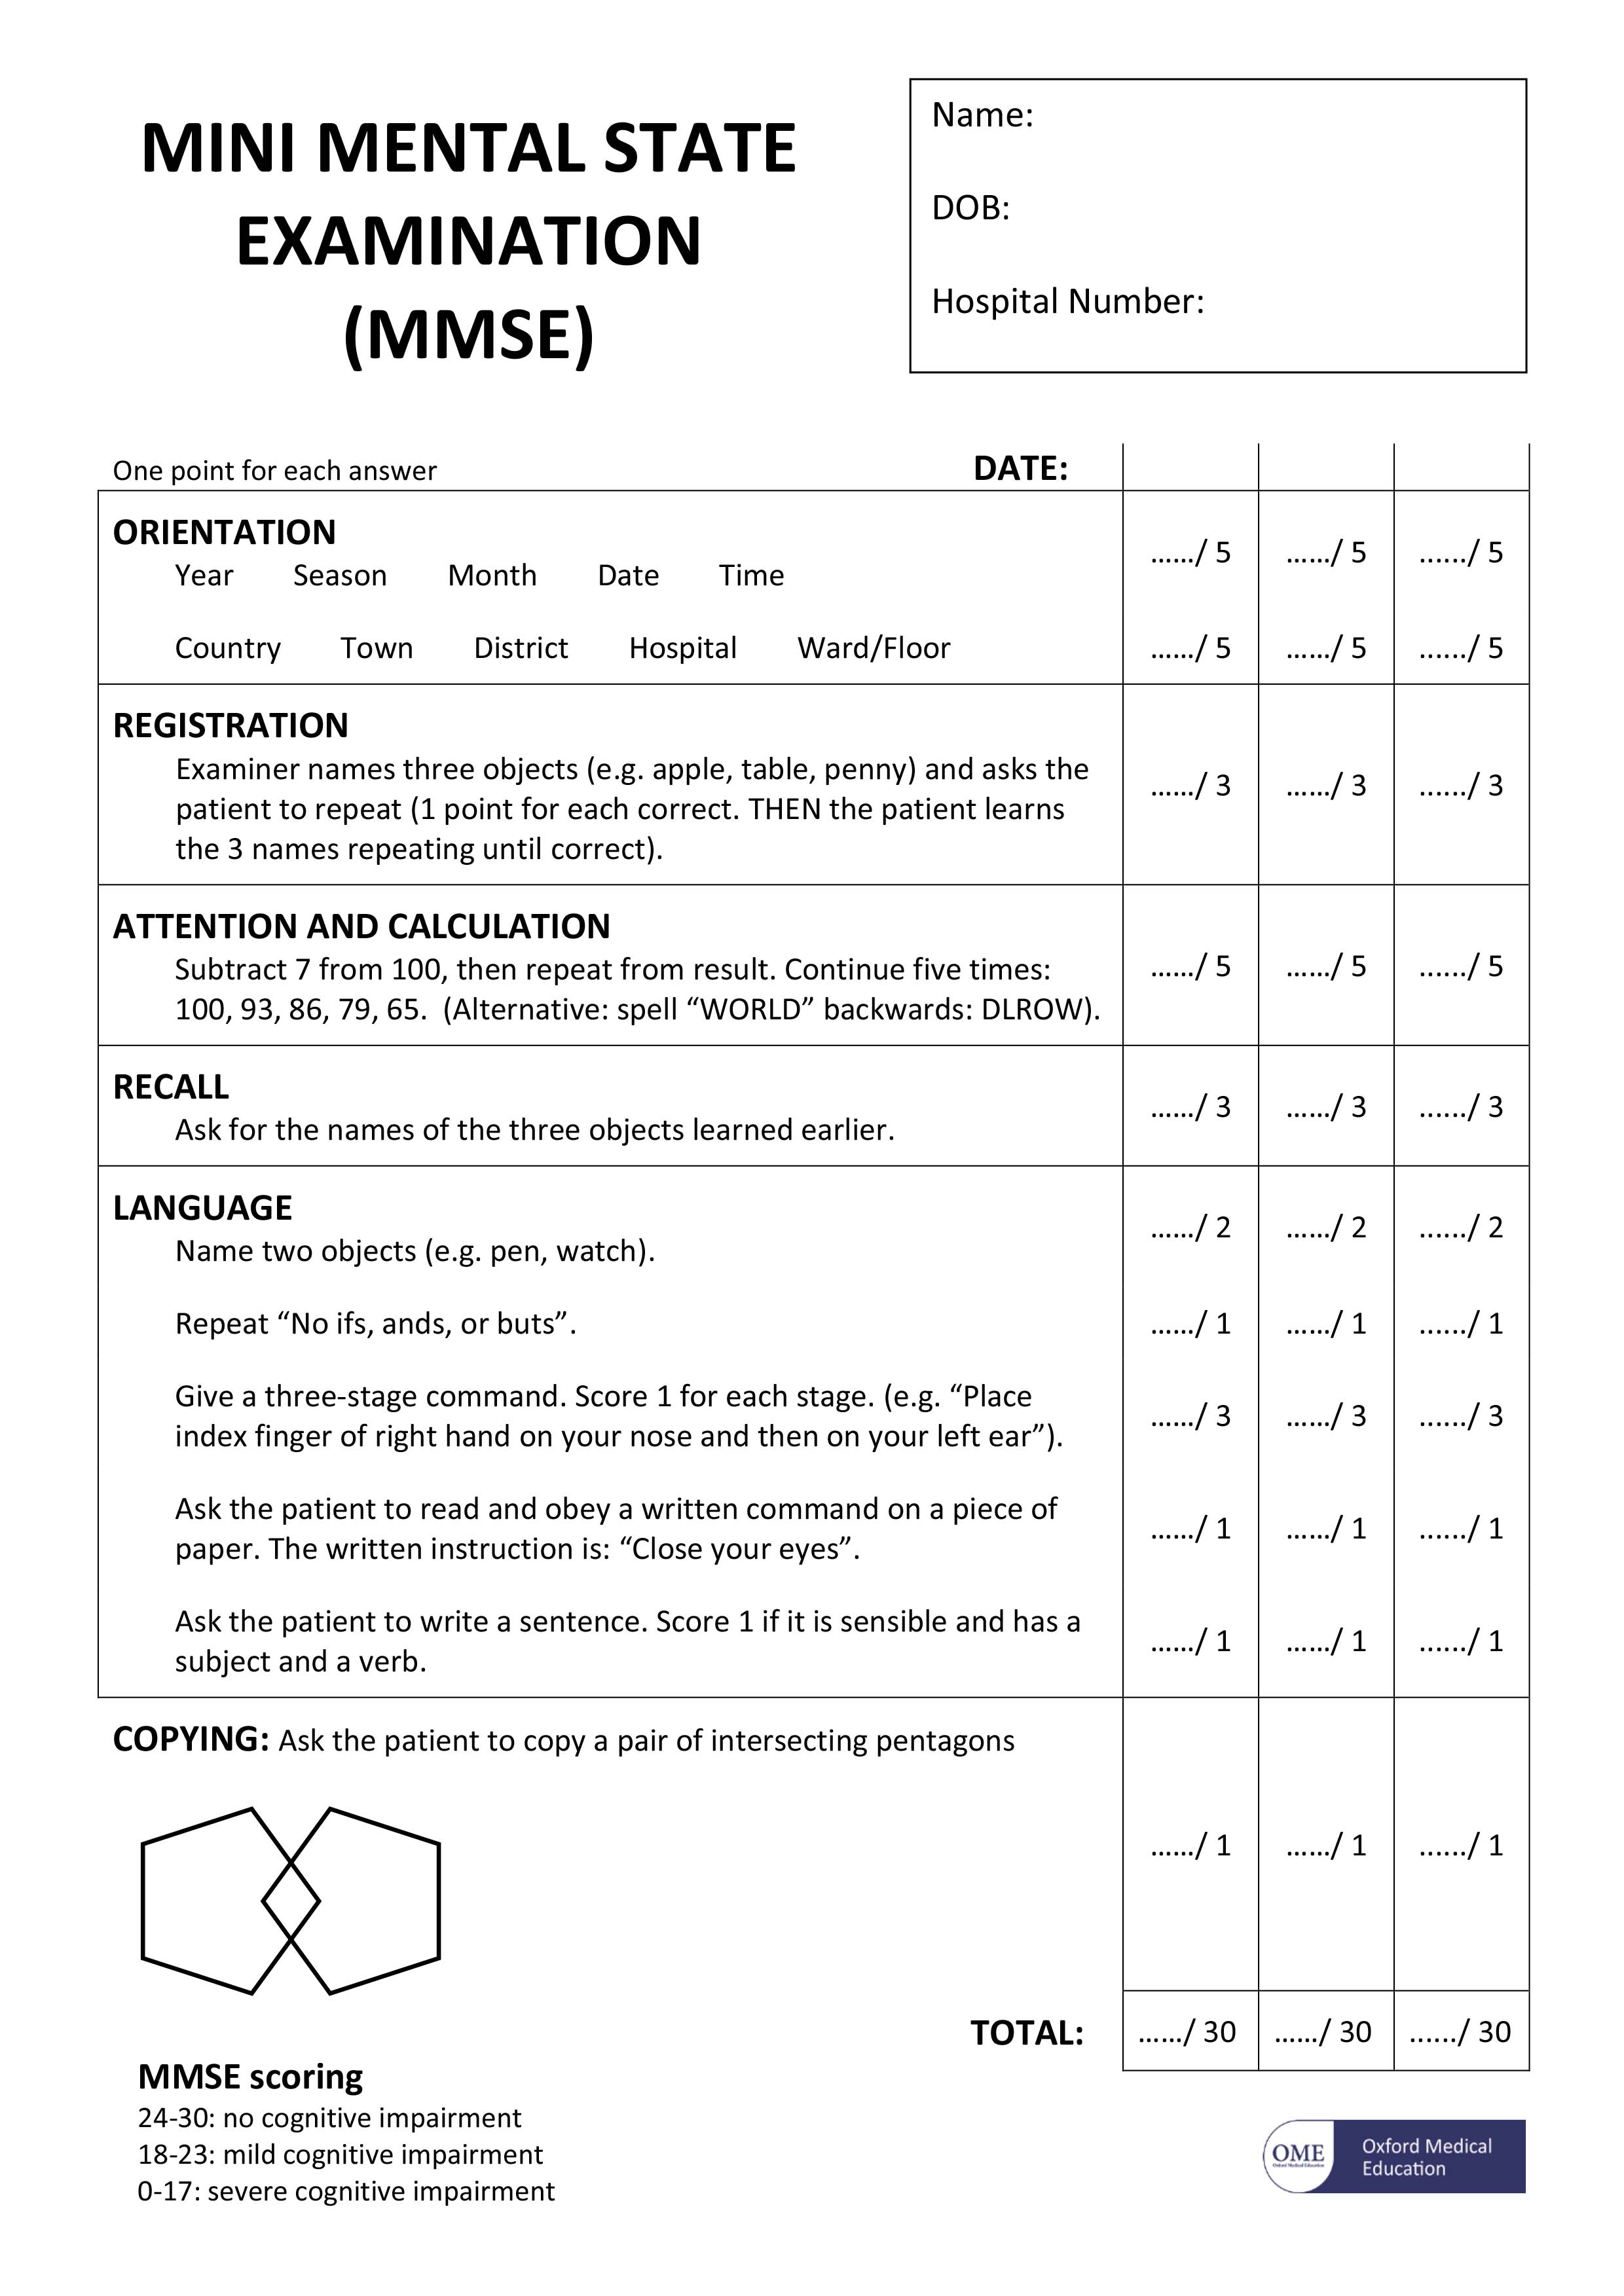 MMSE-mini-mental-state-examination-questionnaire